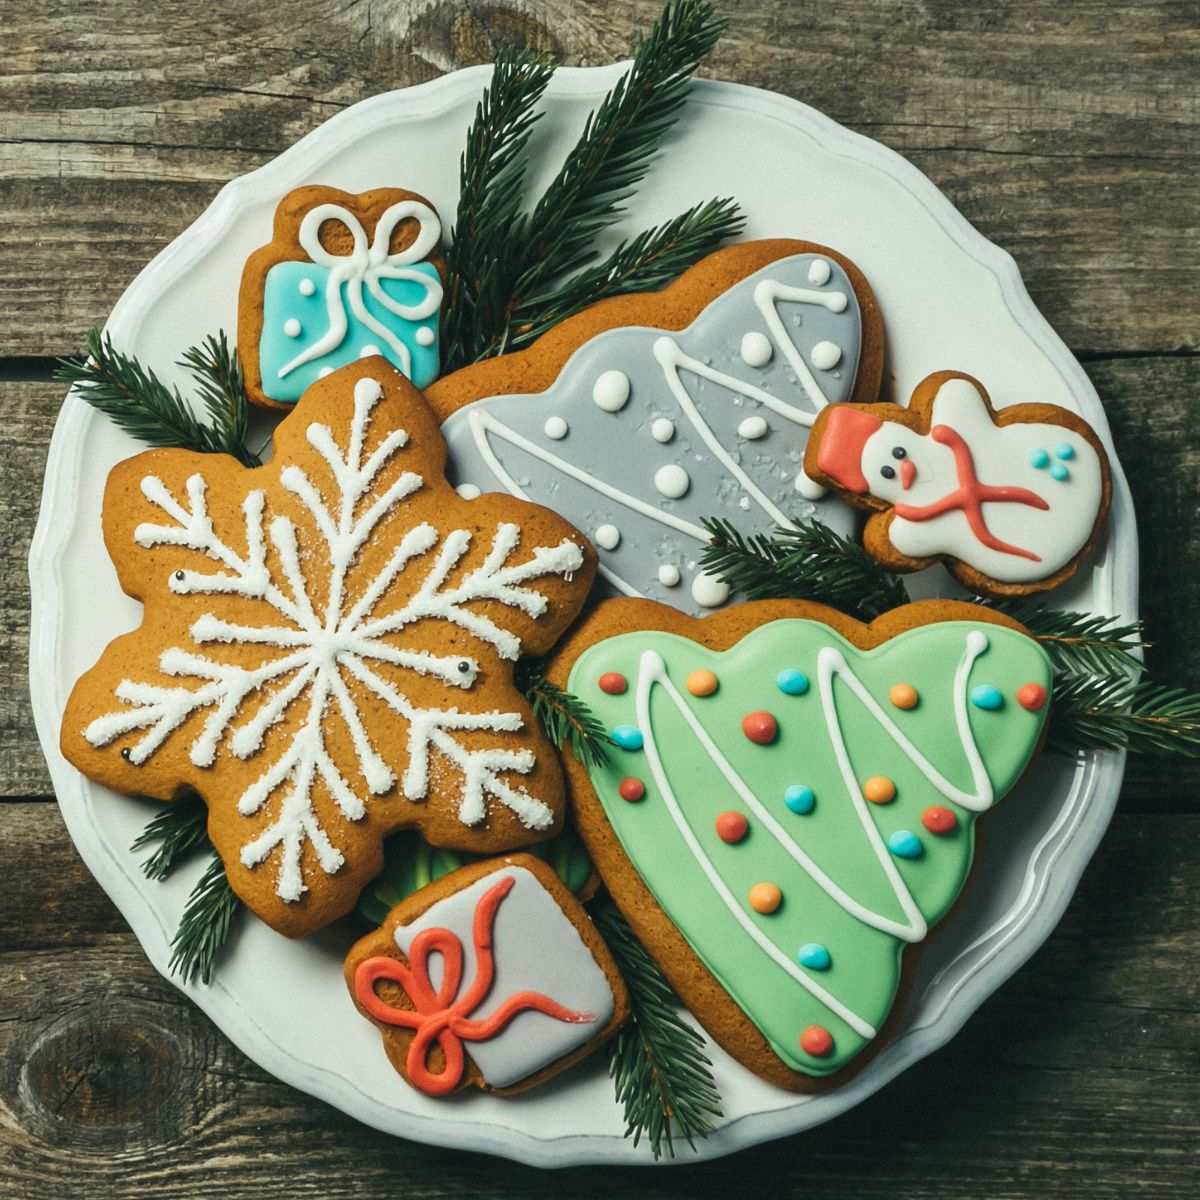 A plate of beautifully decorated Christmas cookies.